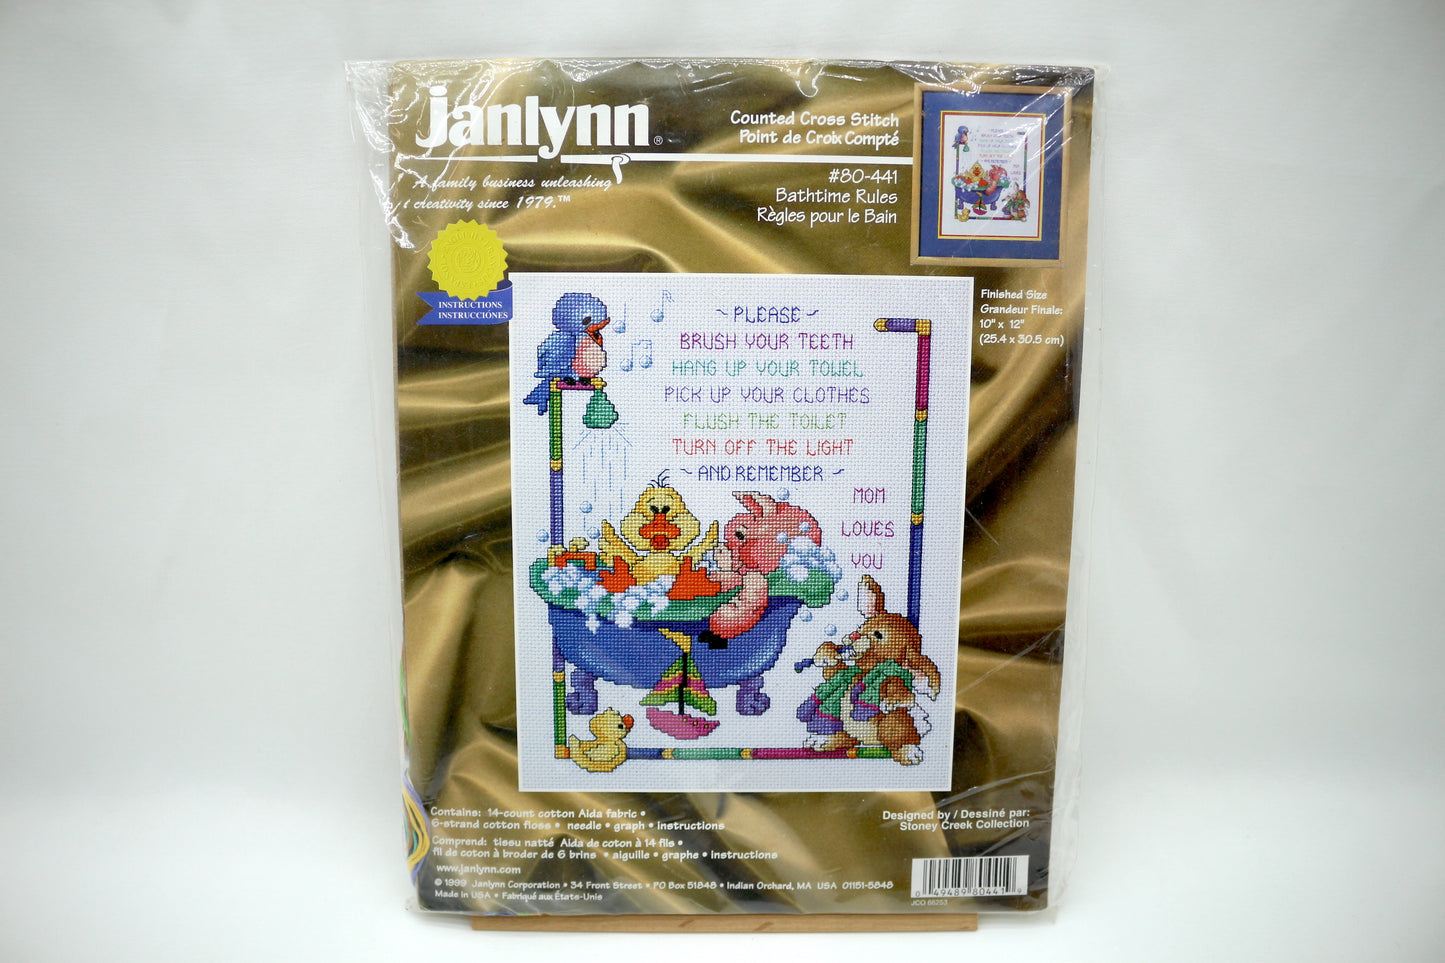 Janlyn Bathtime Rules Counted Cross Stitch